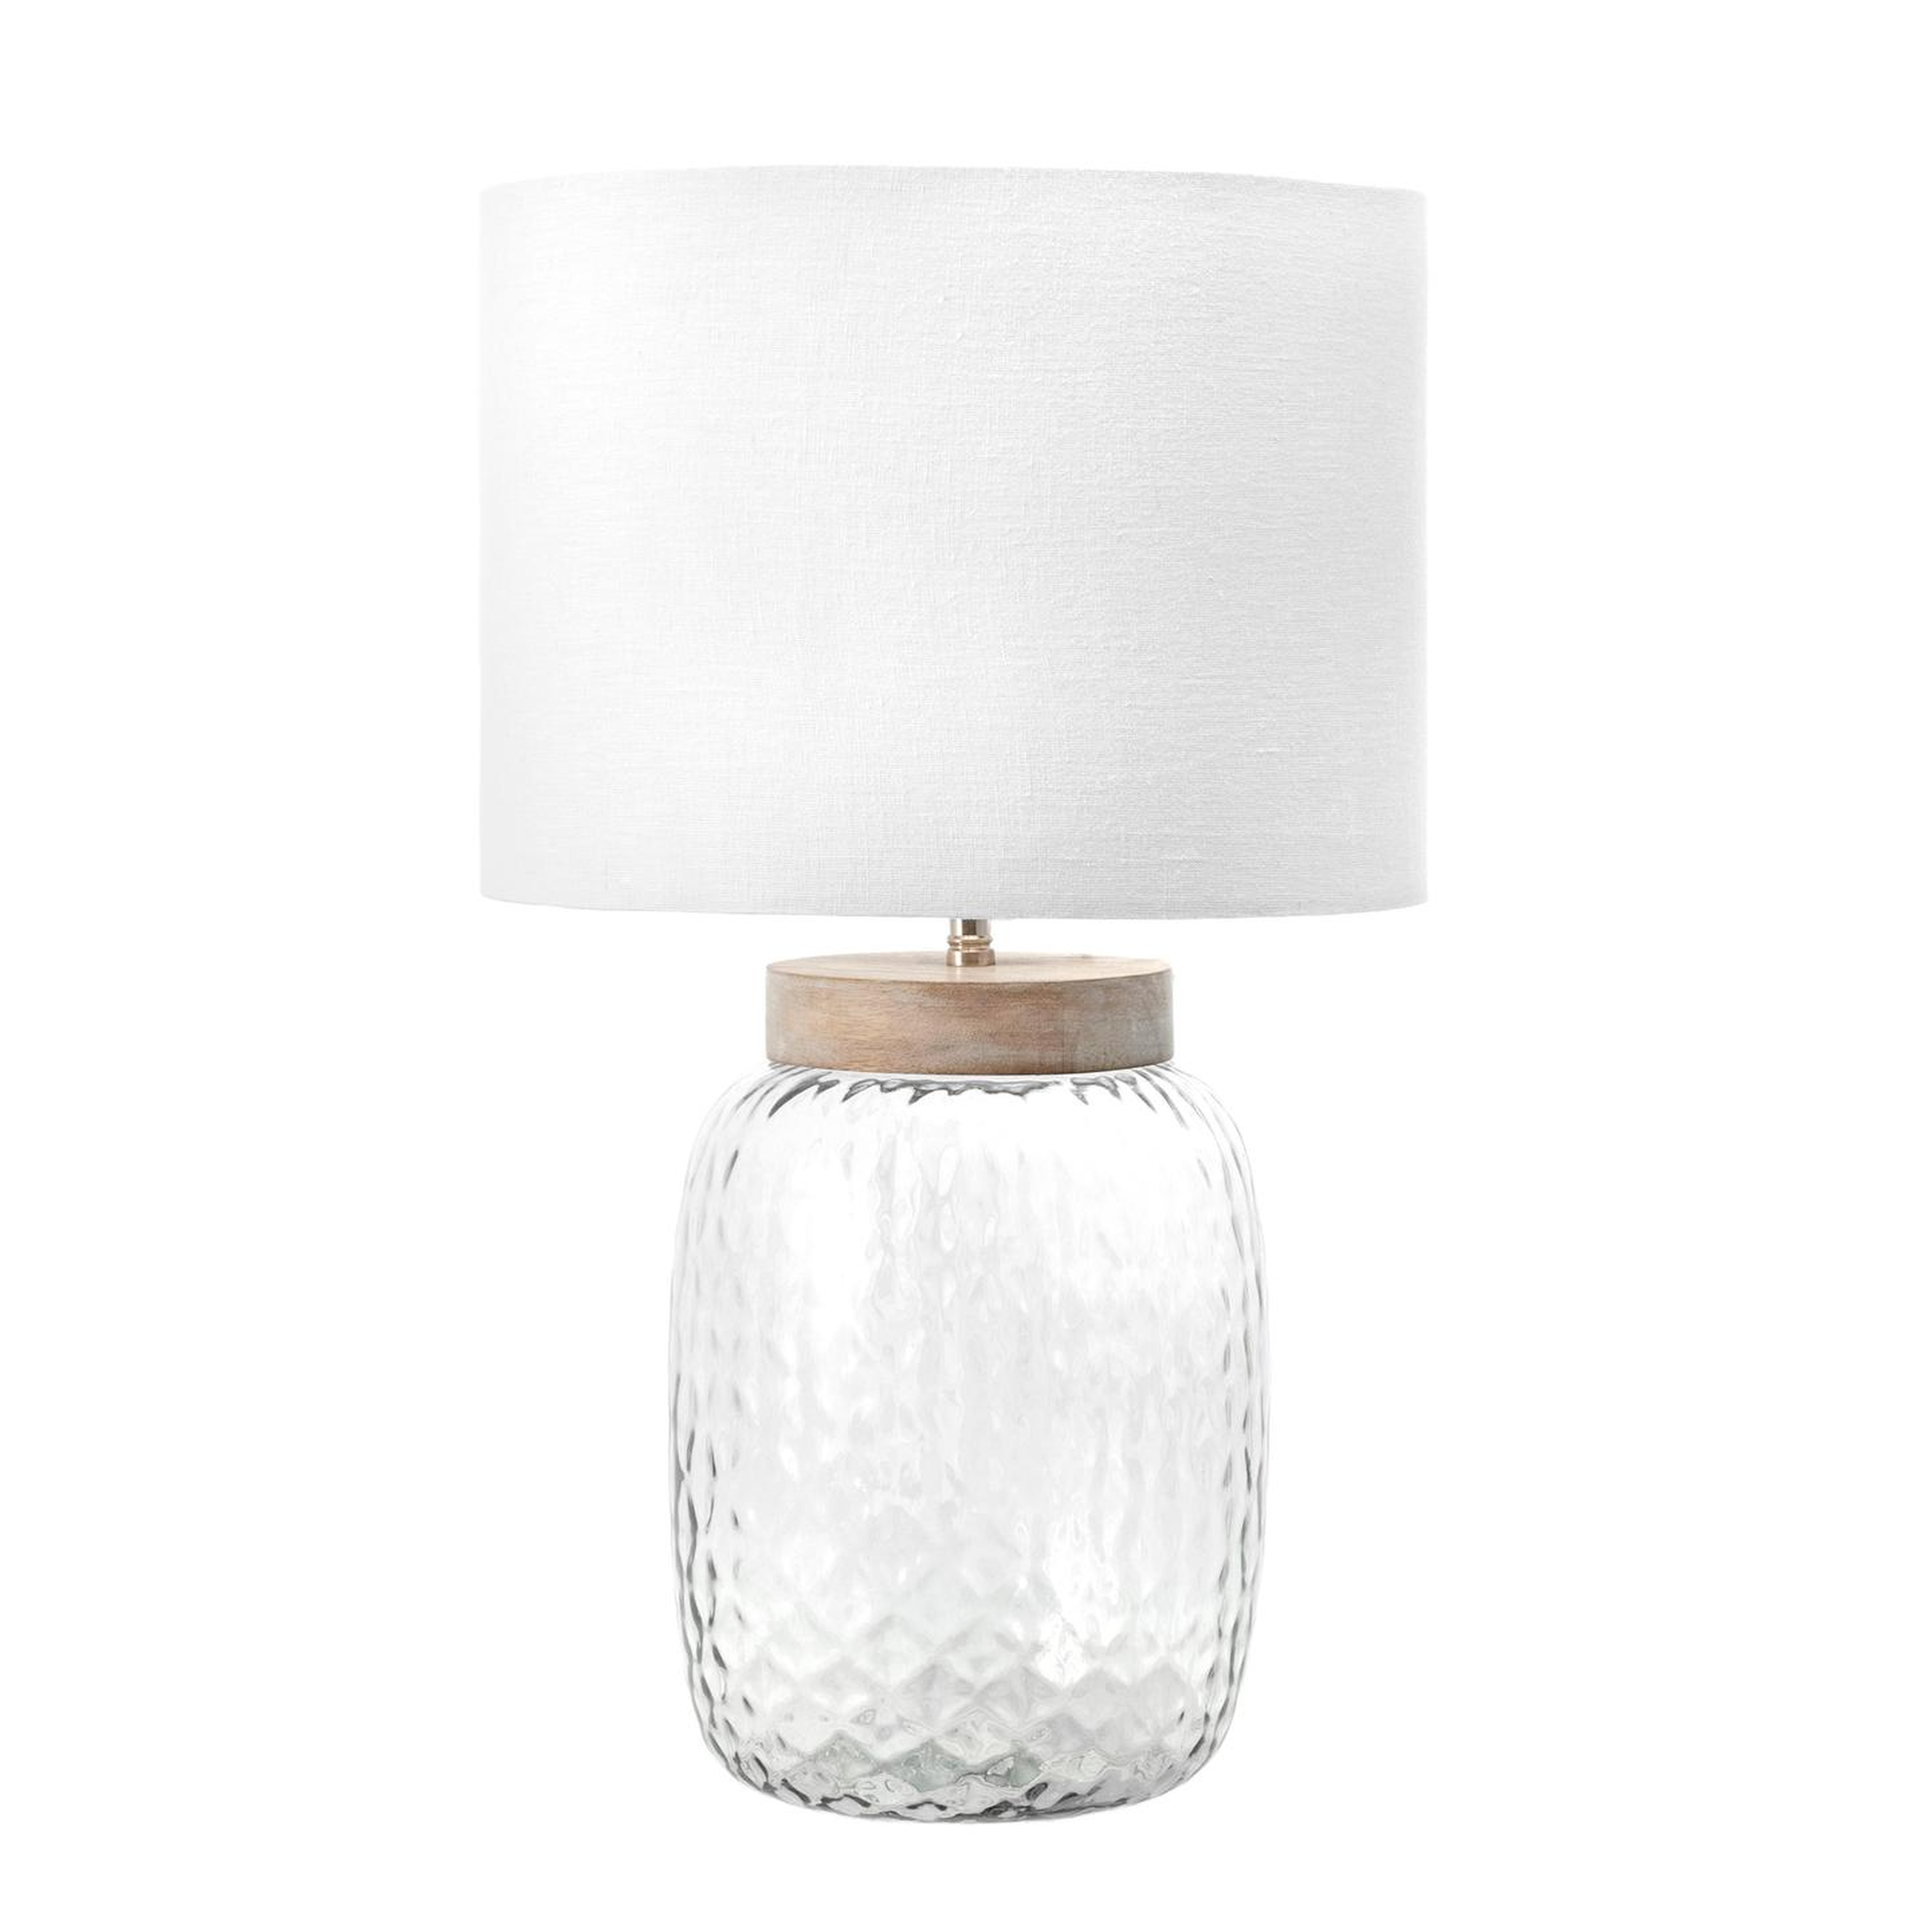 Haines Glass Table Lamp, 20" - Loom 23